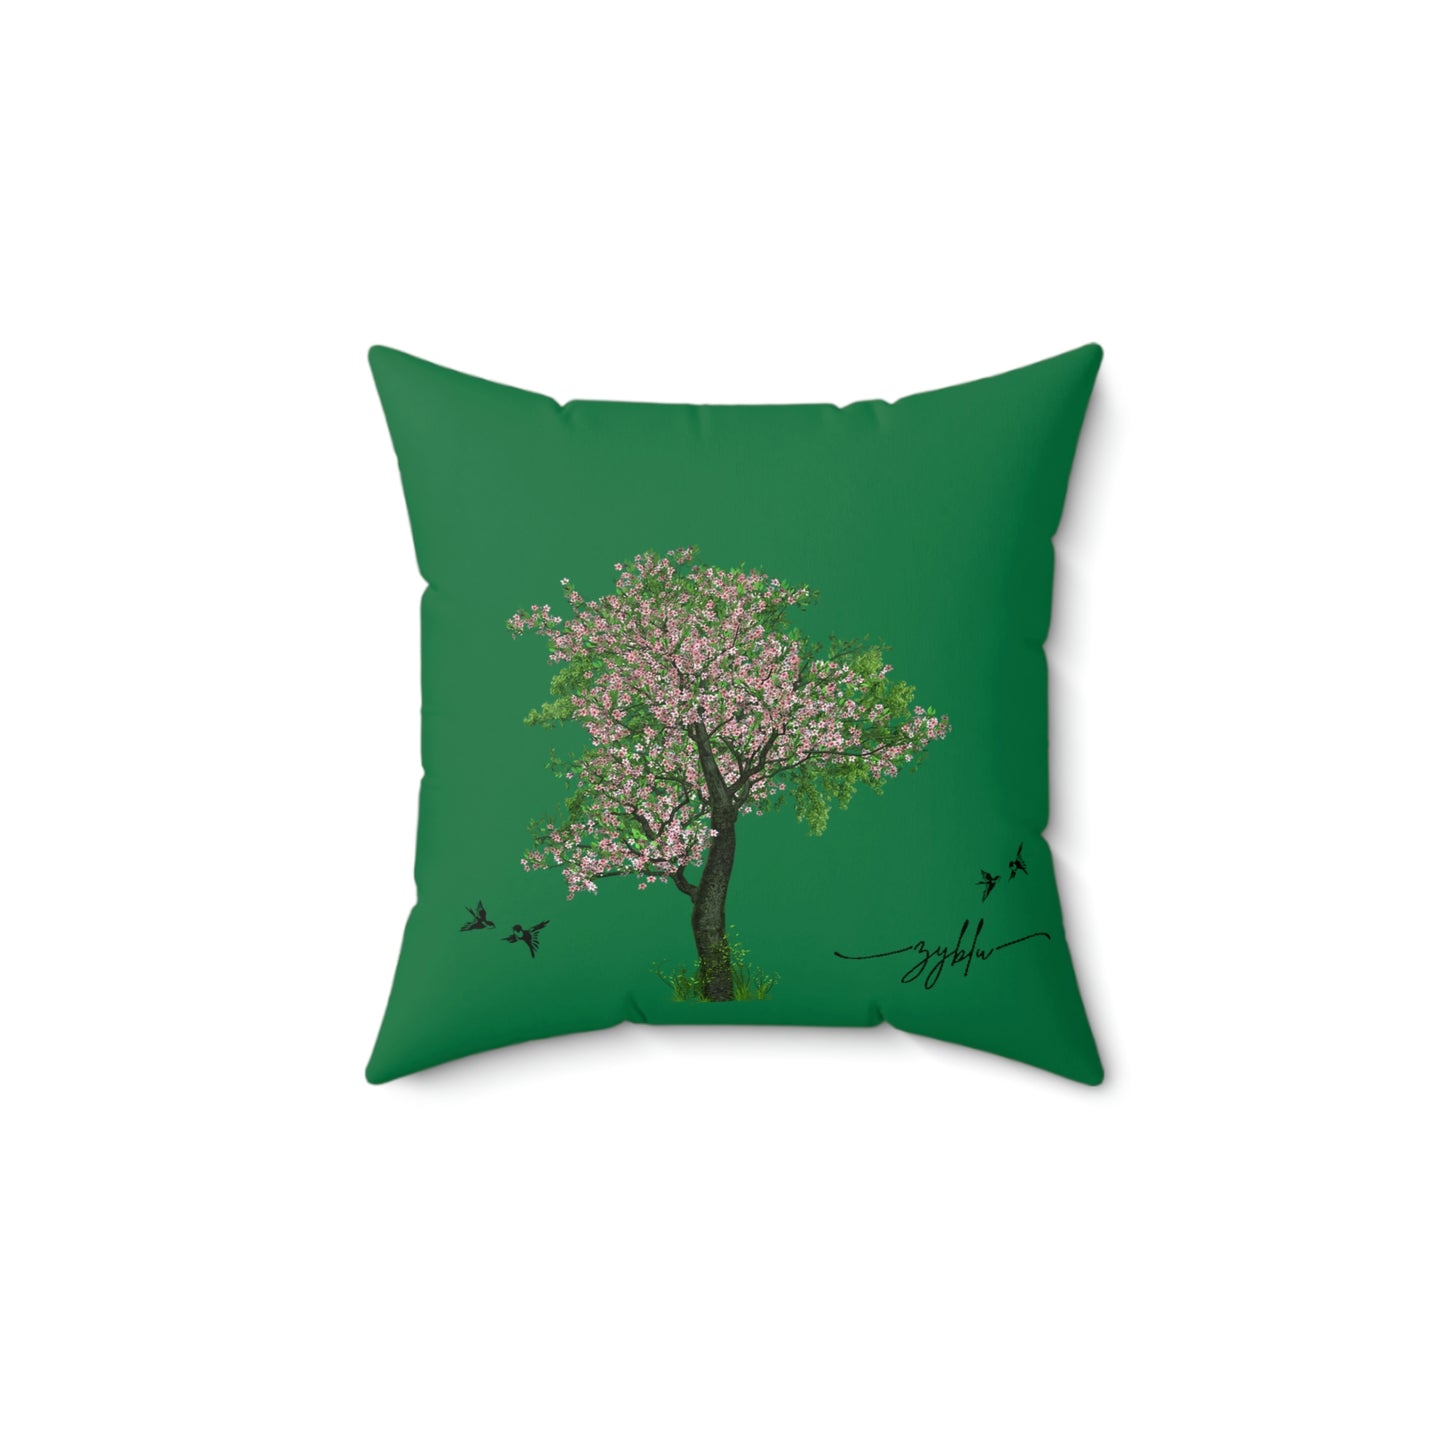 zyblu animal silhouette and cherry blossom Square Pillow dark green